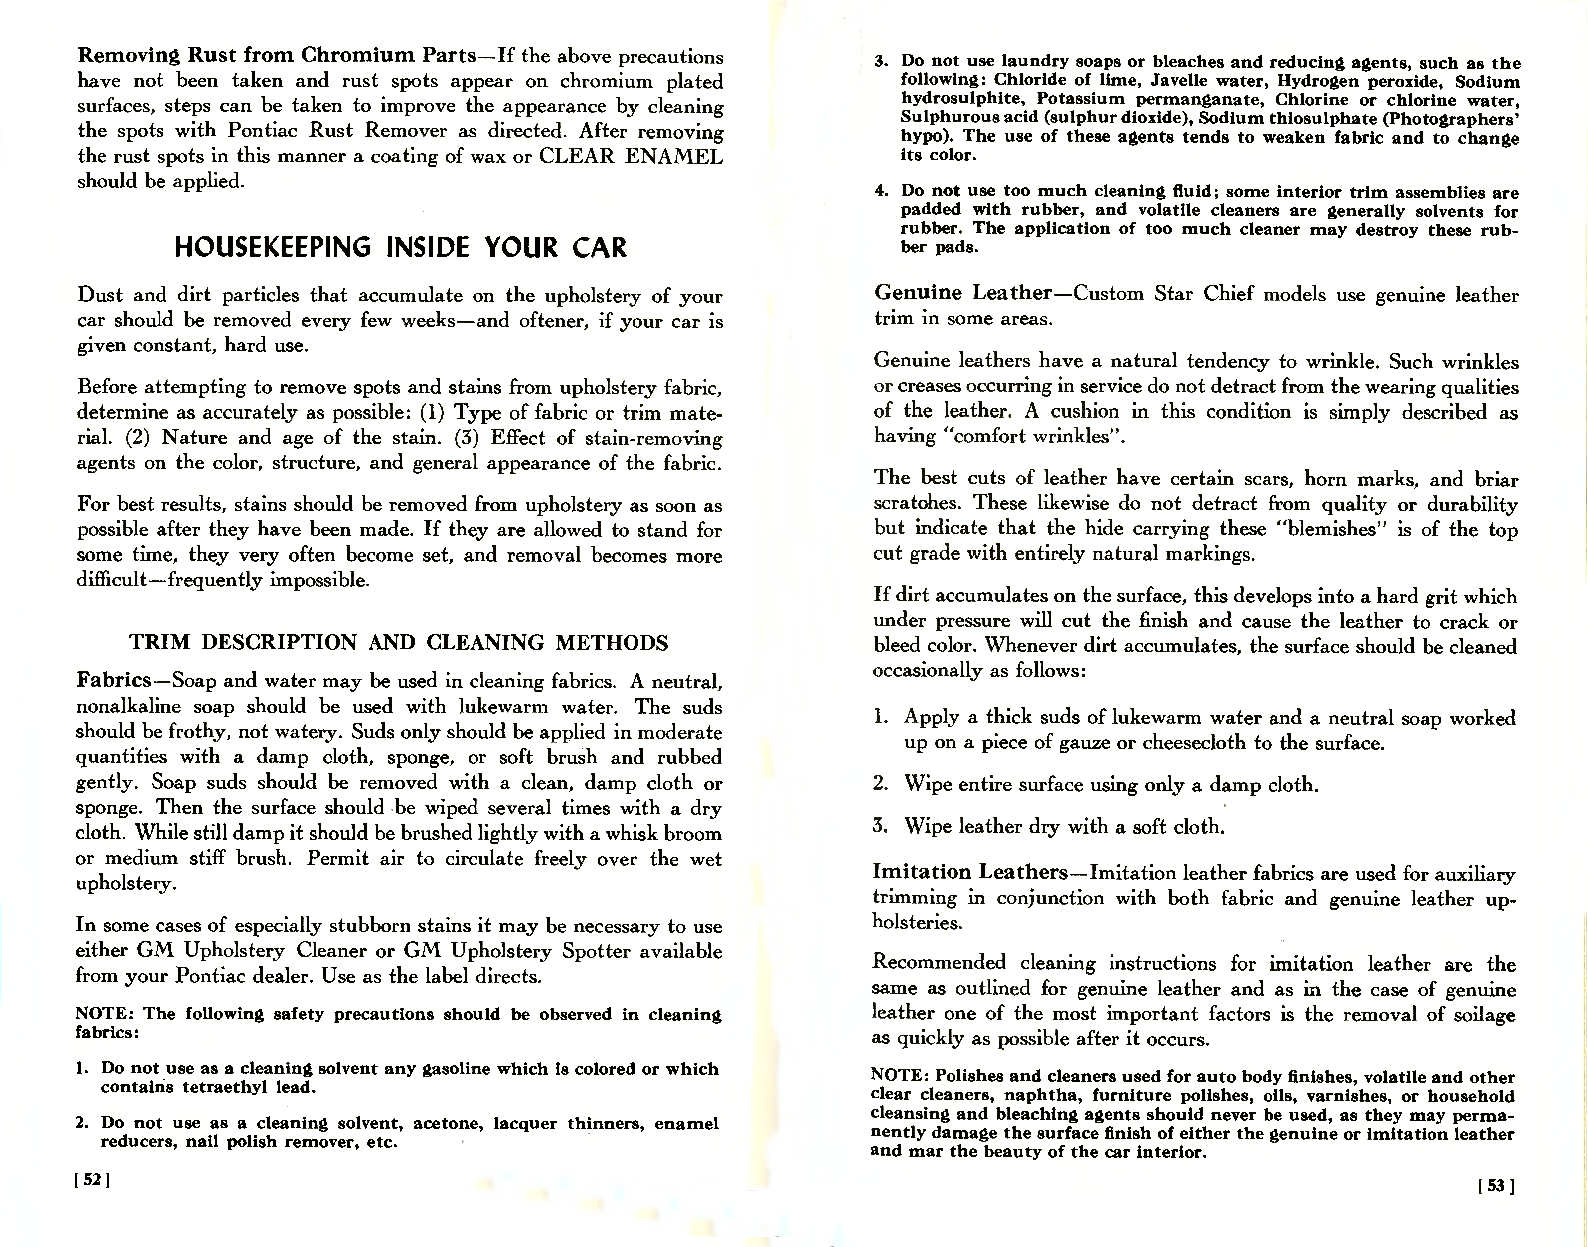 1957_Pontiac_Owners_Guide-52-53